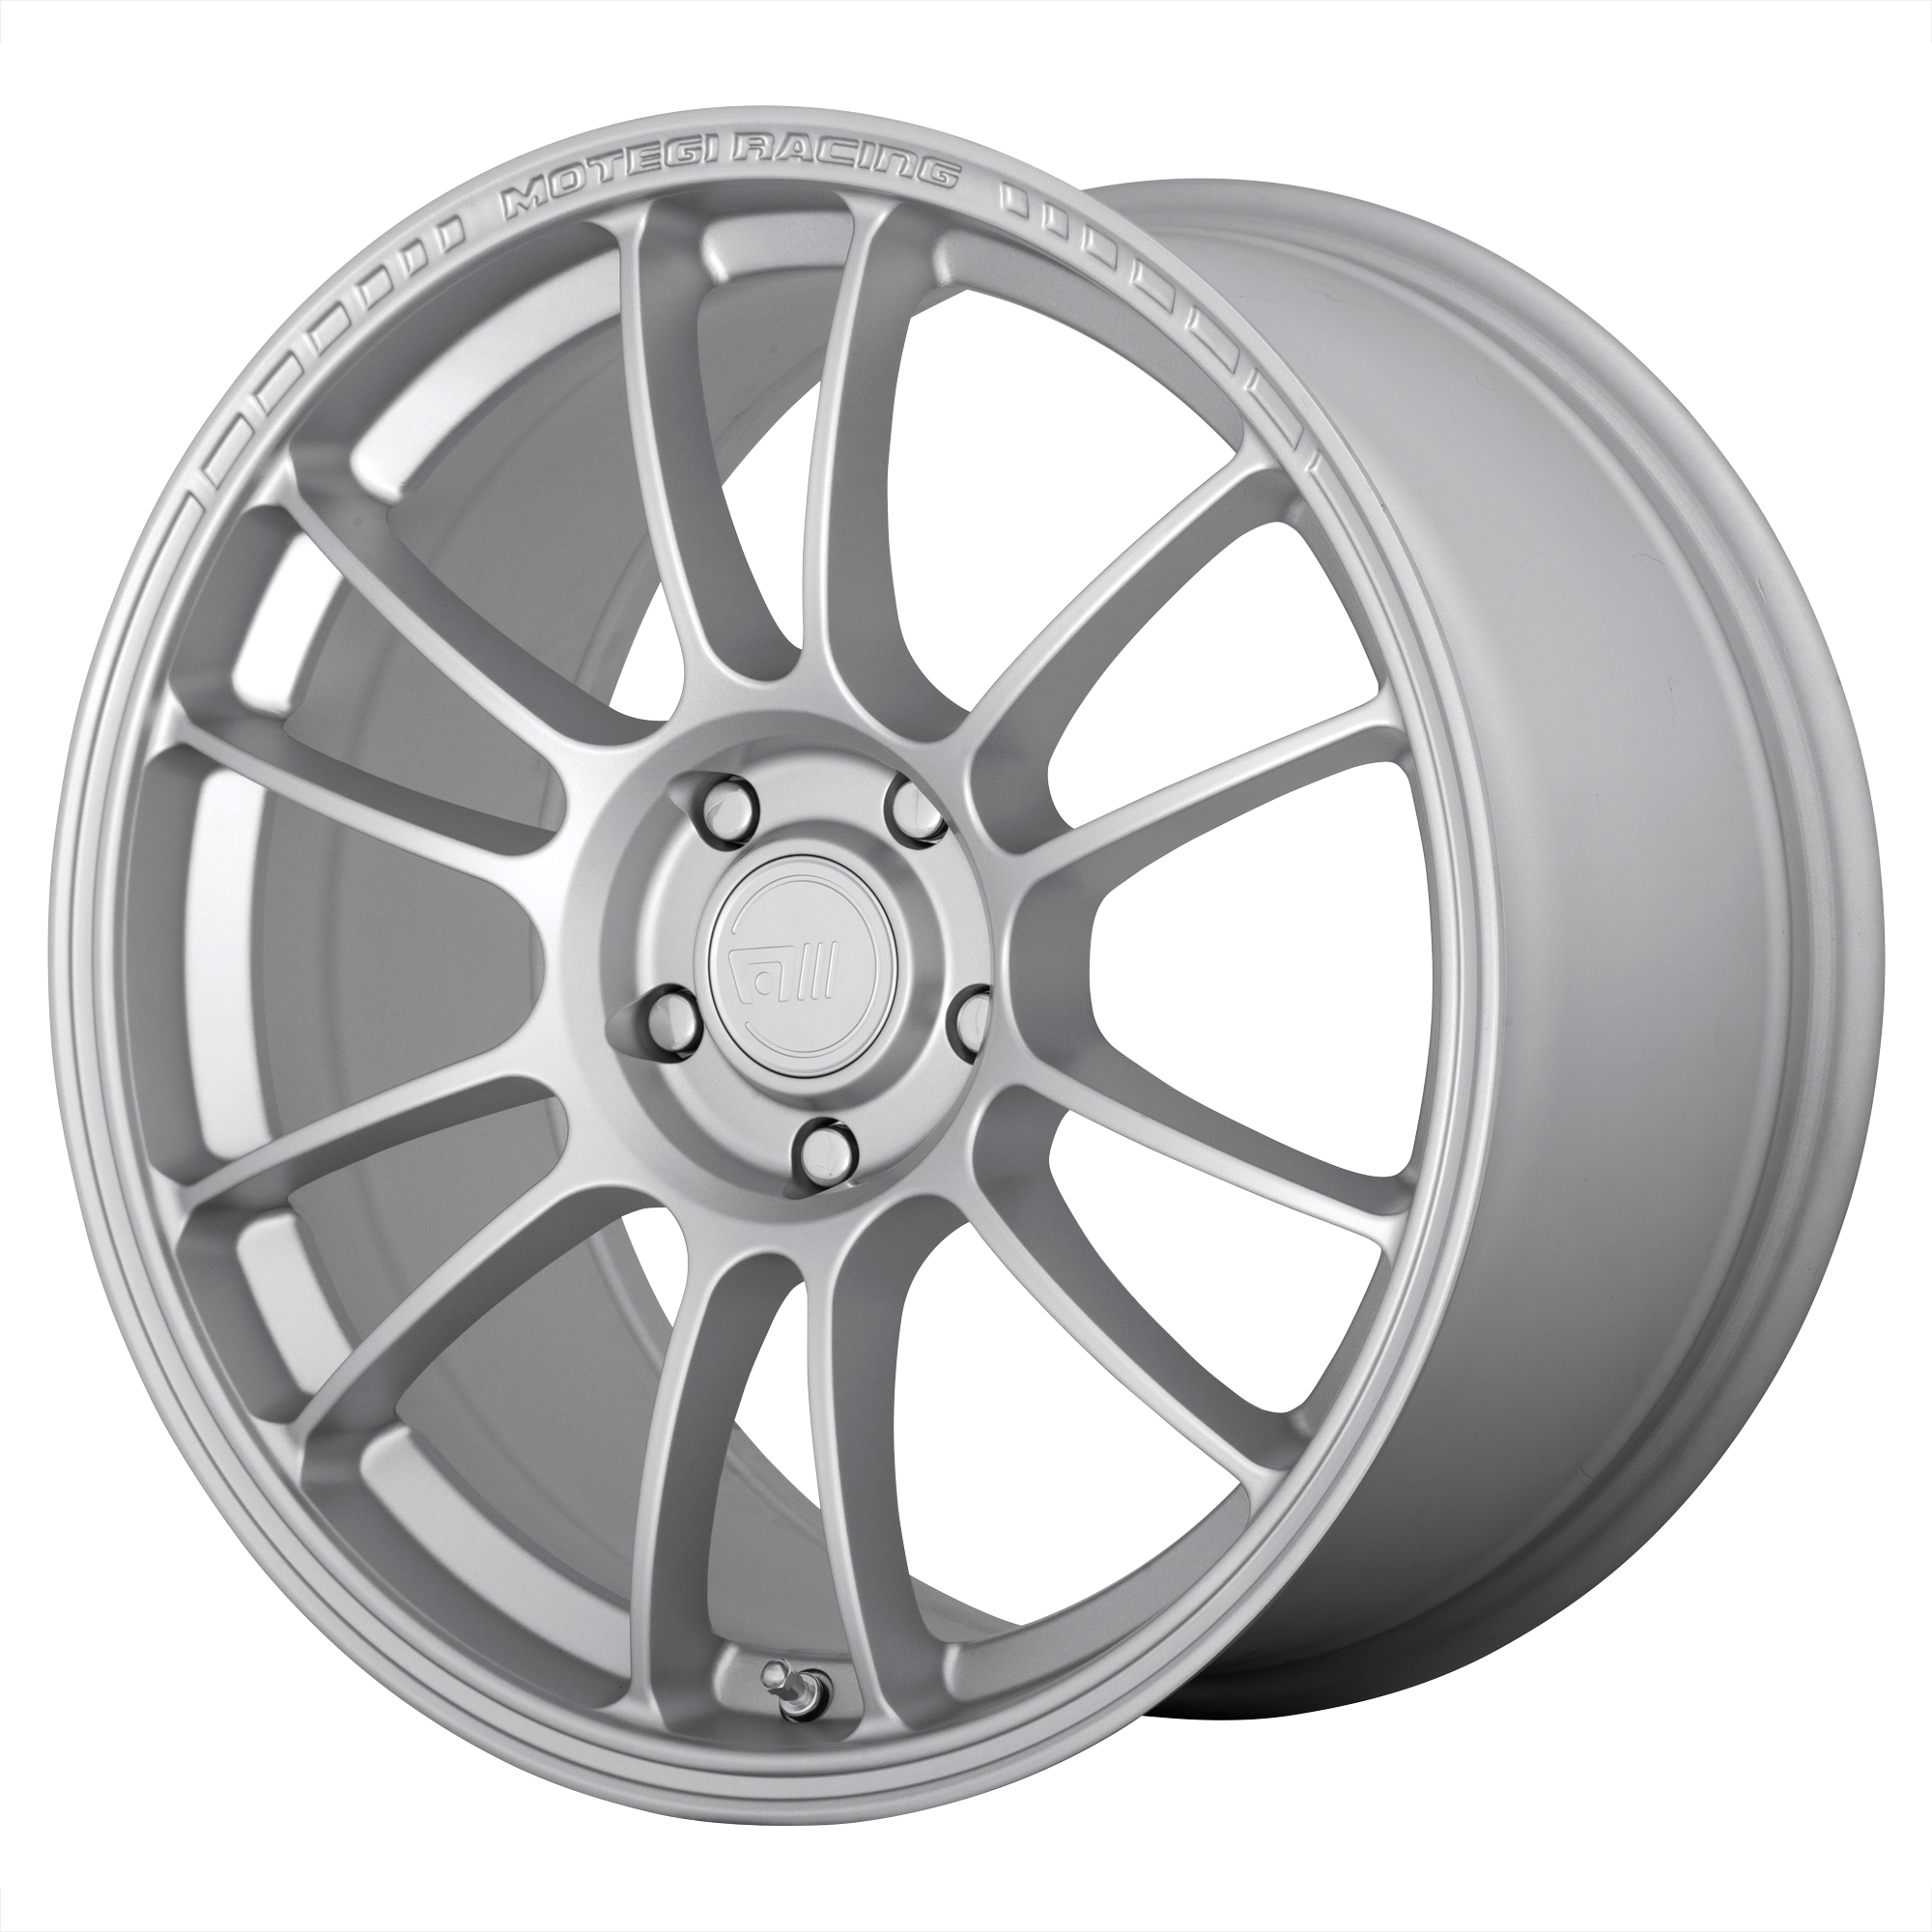 SS6 15x8 4x100.00 HYPER SILVER (28 mm) - Tires and Engine Performance